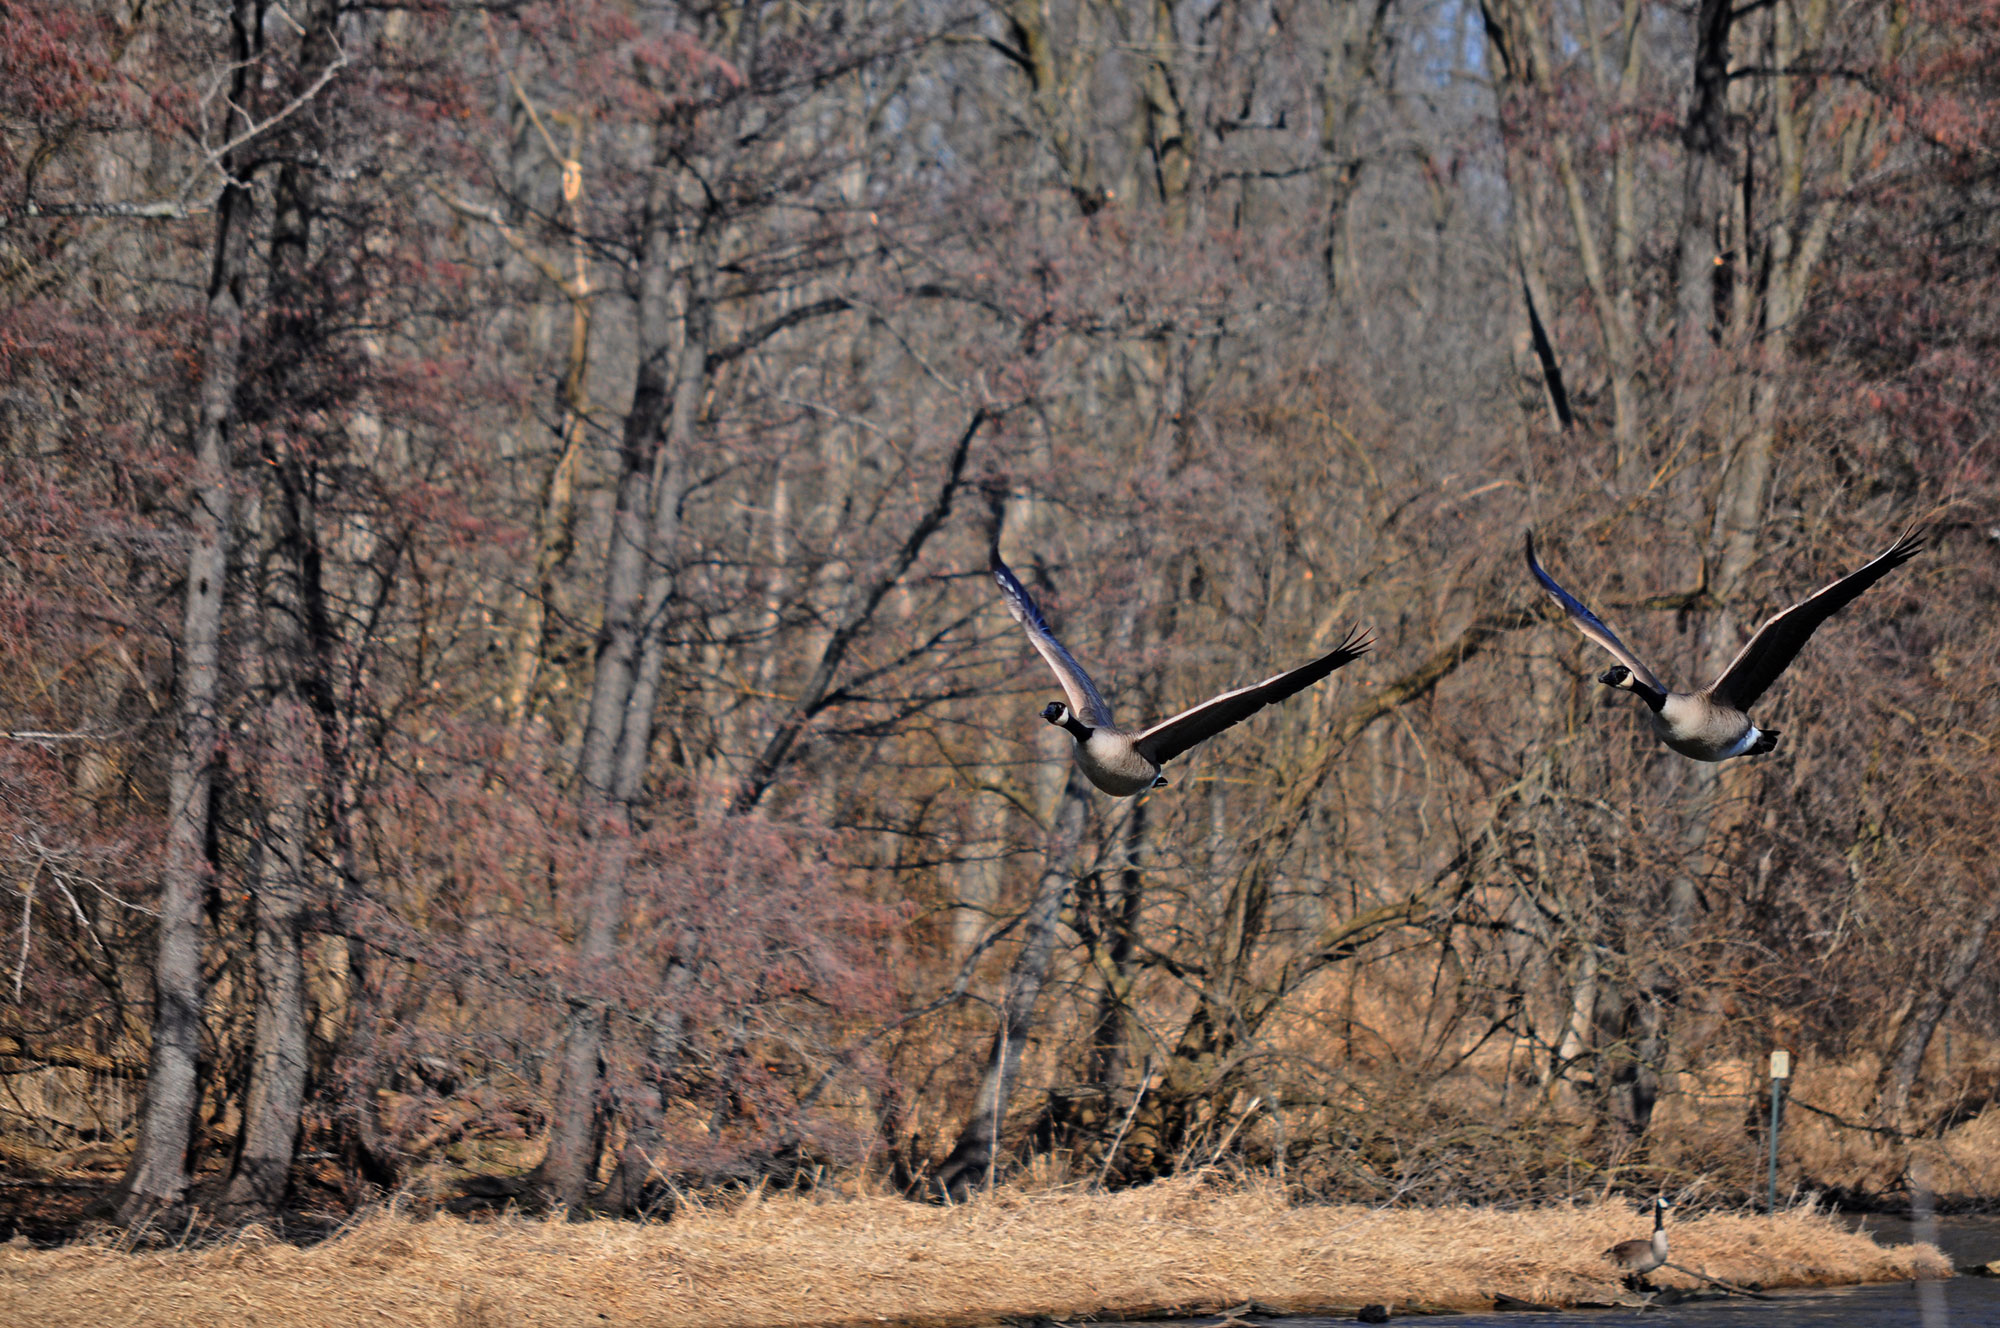 Two Canada geese in flight.